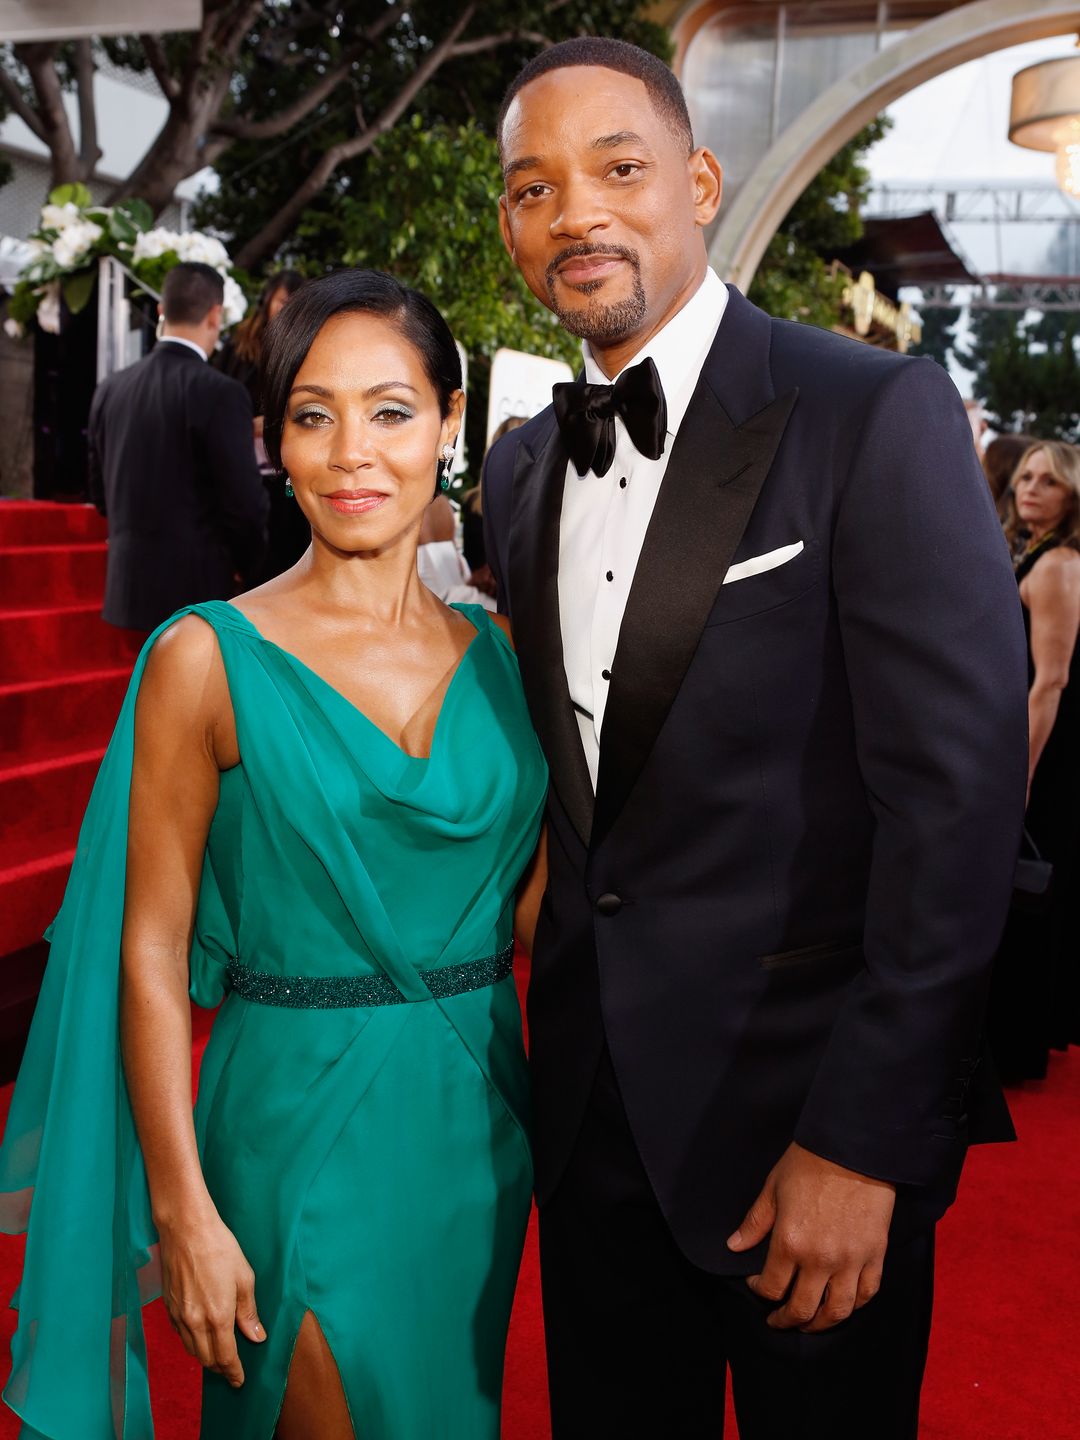 Jada Pinkett Smith and Will Smith smiling at a red carpet events